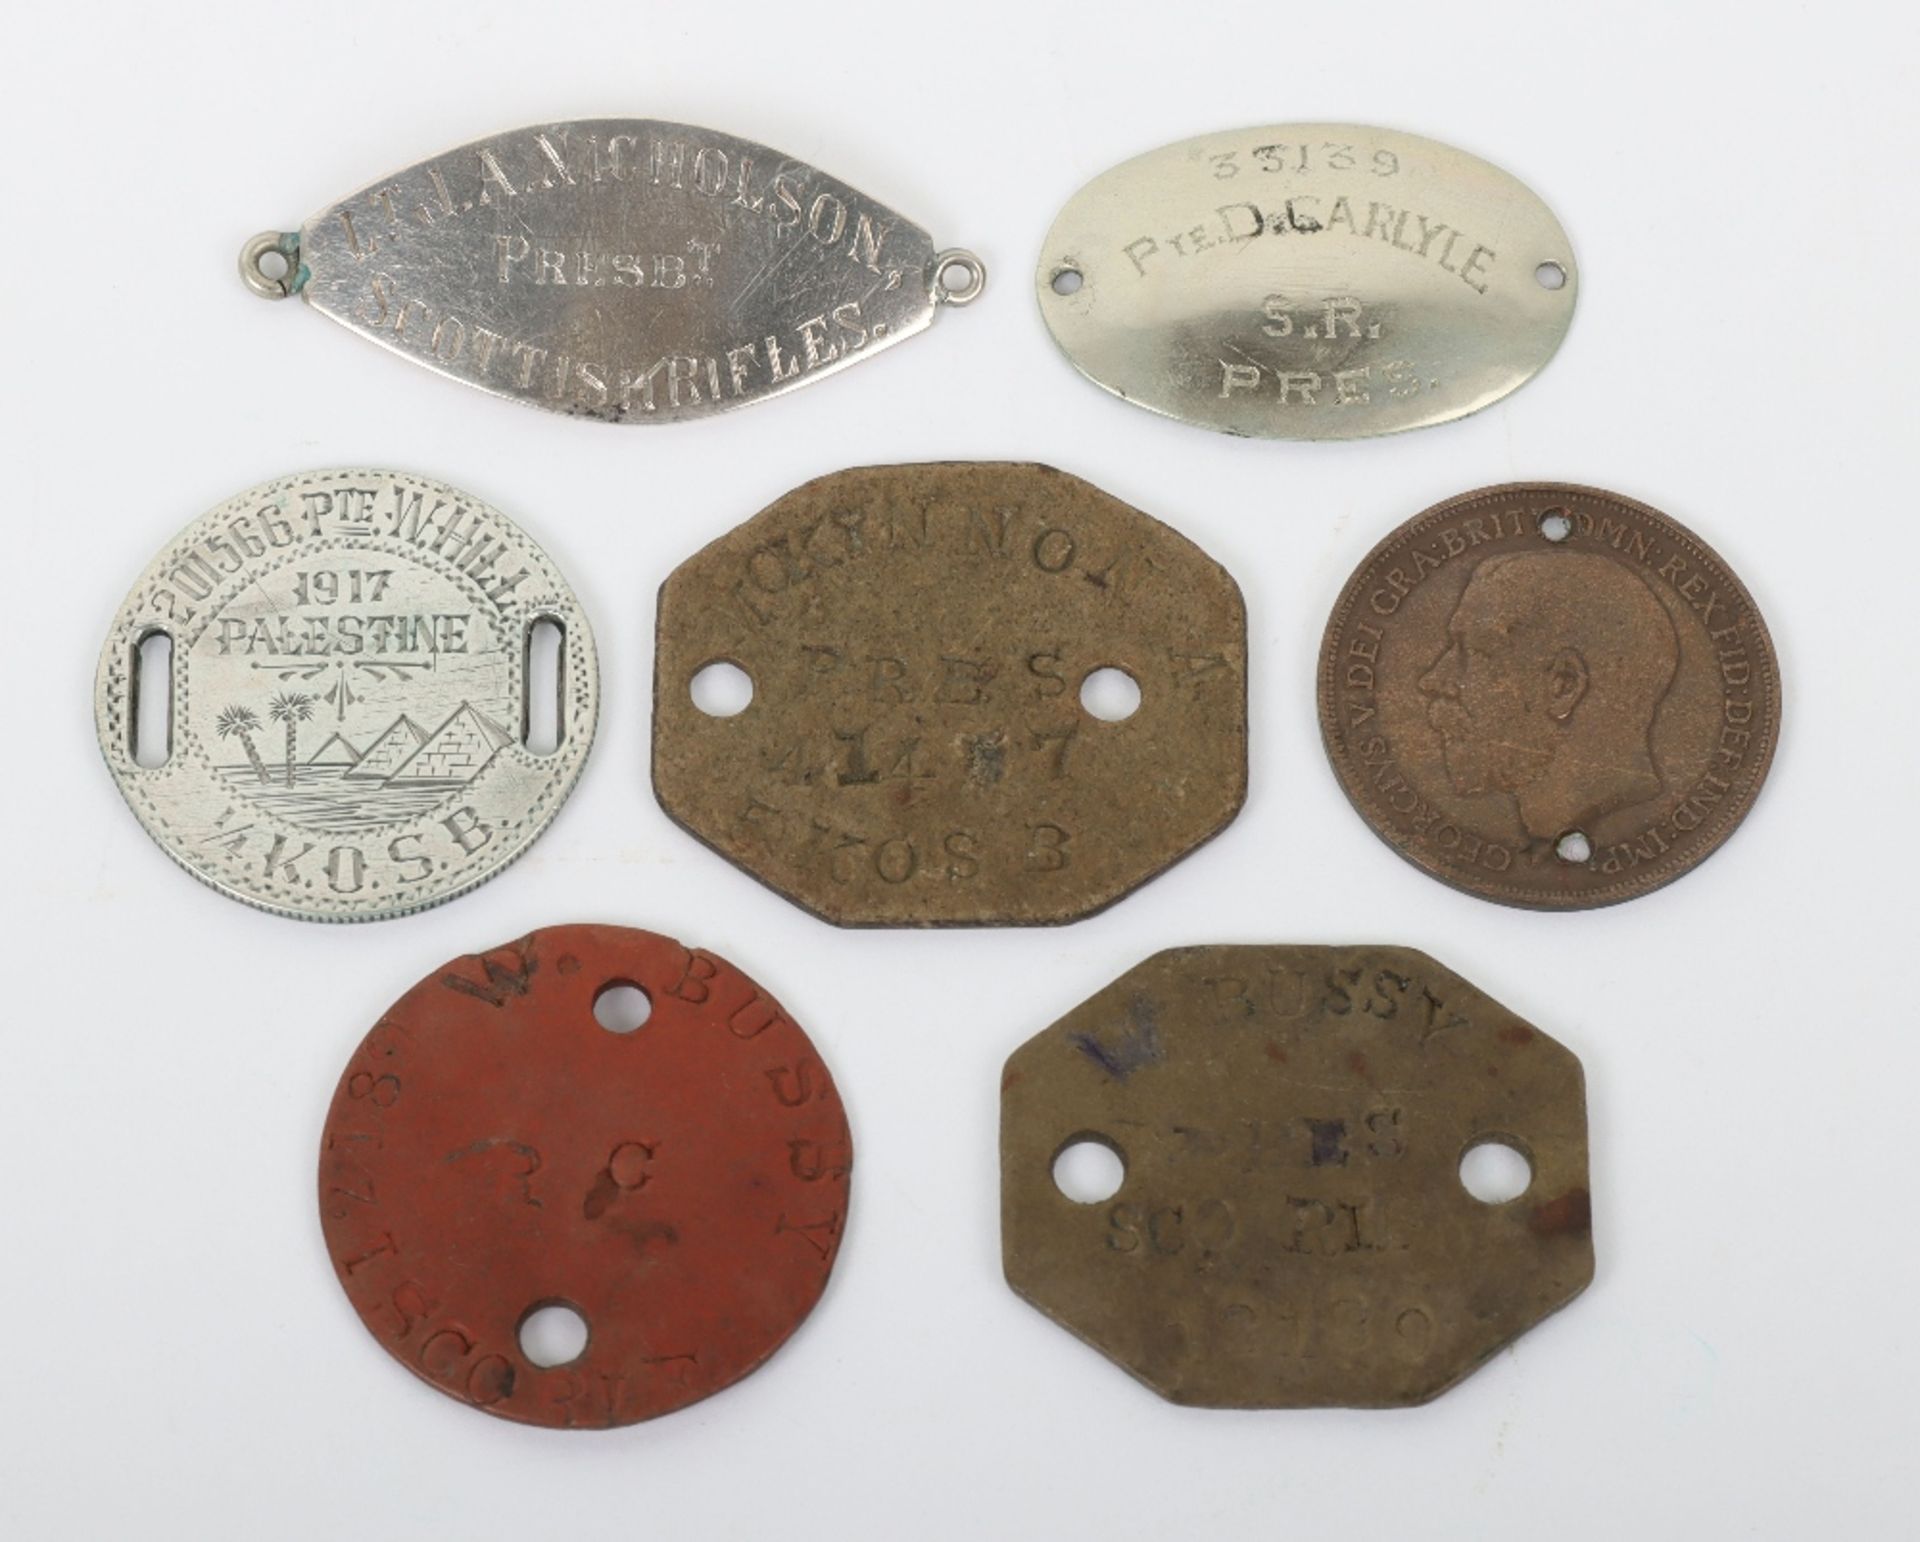 Grouping of Identity Discs of Scottish Rifles and Kings Own Scottish Borderers Interest